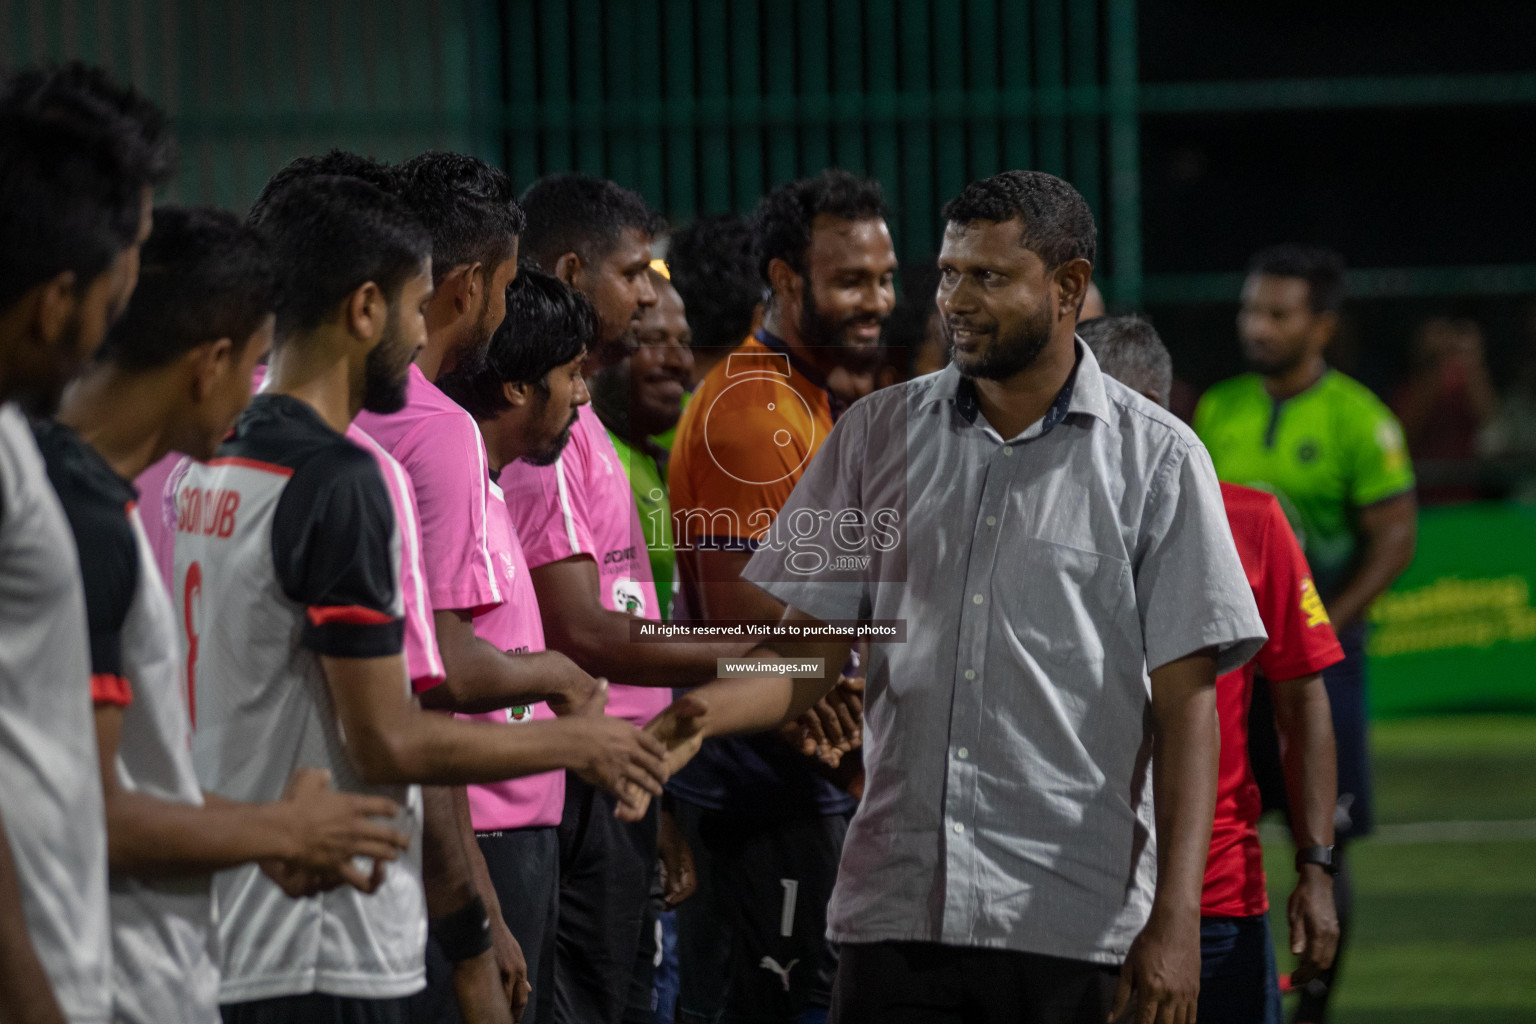 Quarterfinals of Club Maldives Cup 2019 on 28th April 2019, held in Hulhumale. Photos: Shuadhu Abdul Sattar / images.mv